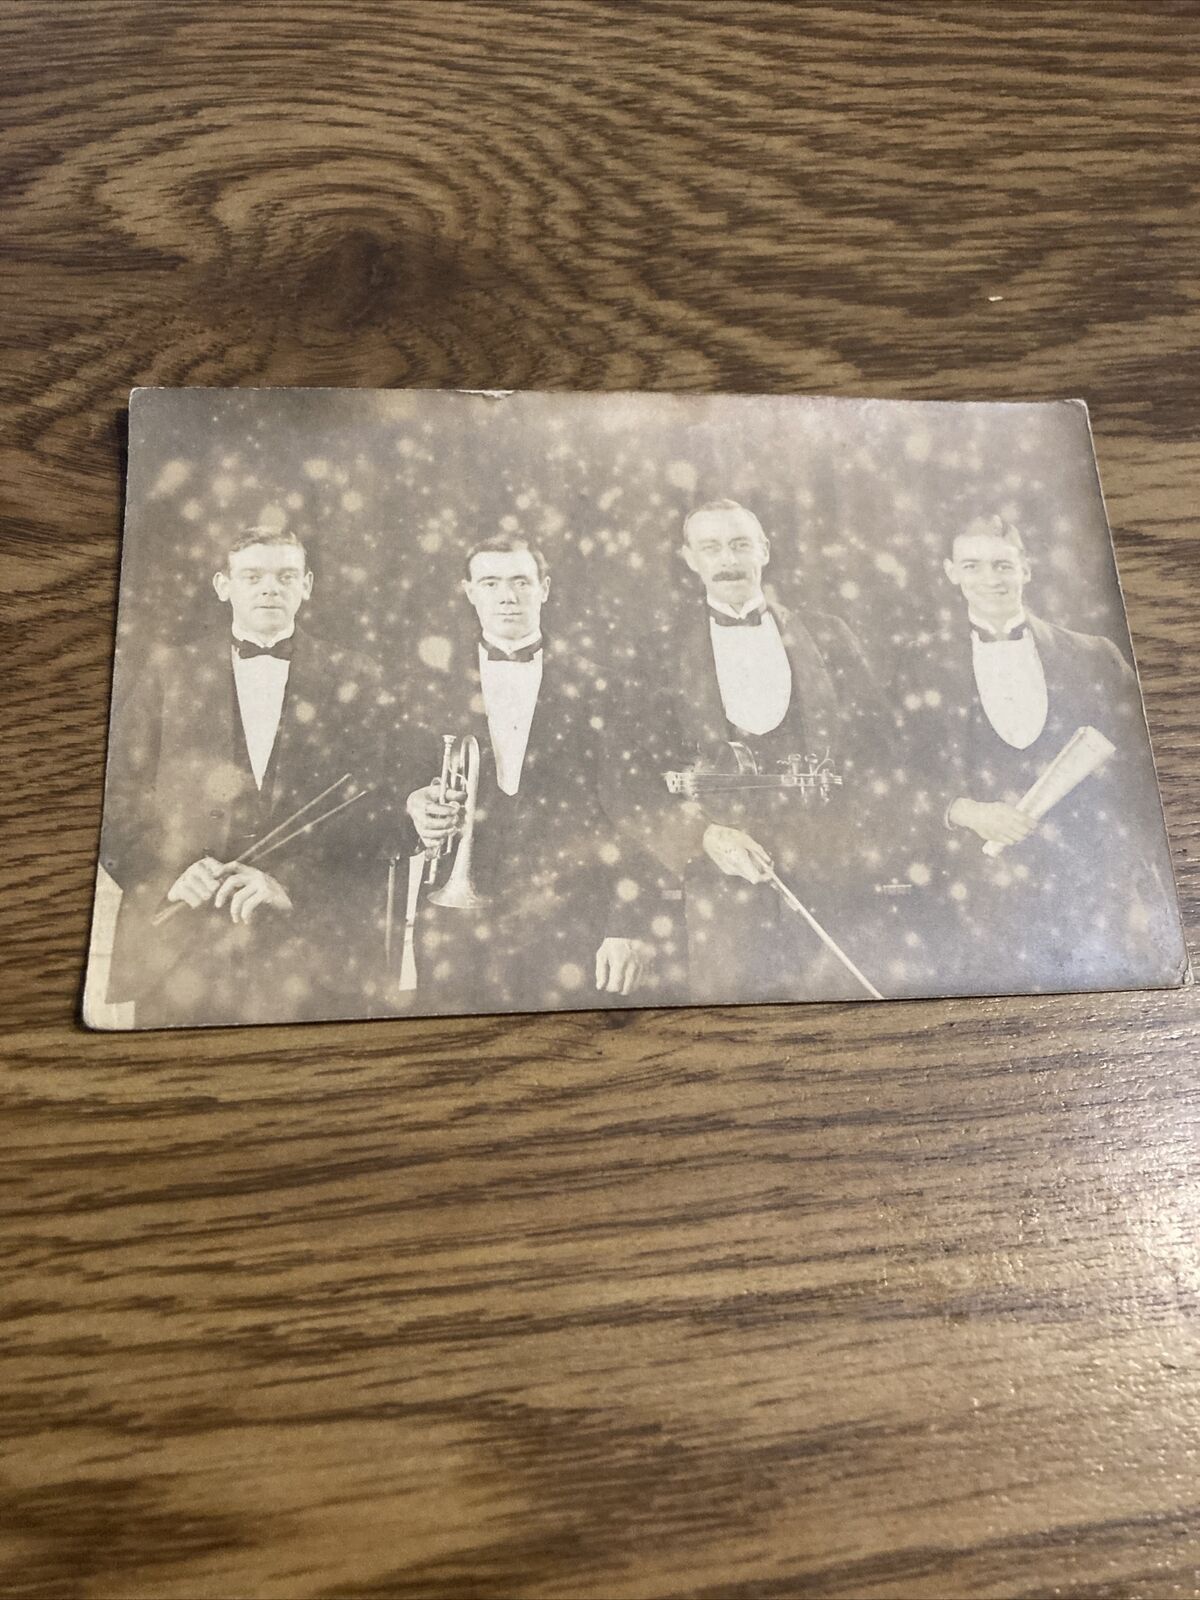 Antique Postcard 1922 RPPC Musicians, Band 4 Men with Instruments in tuxes